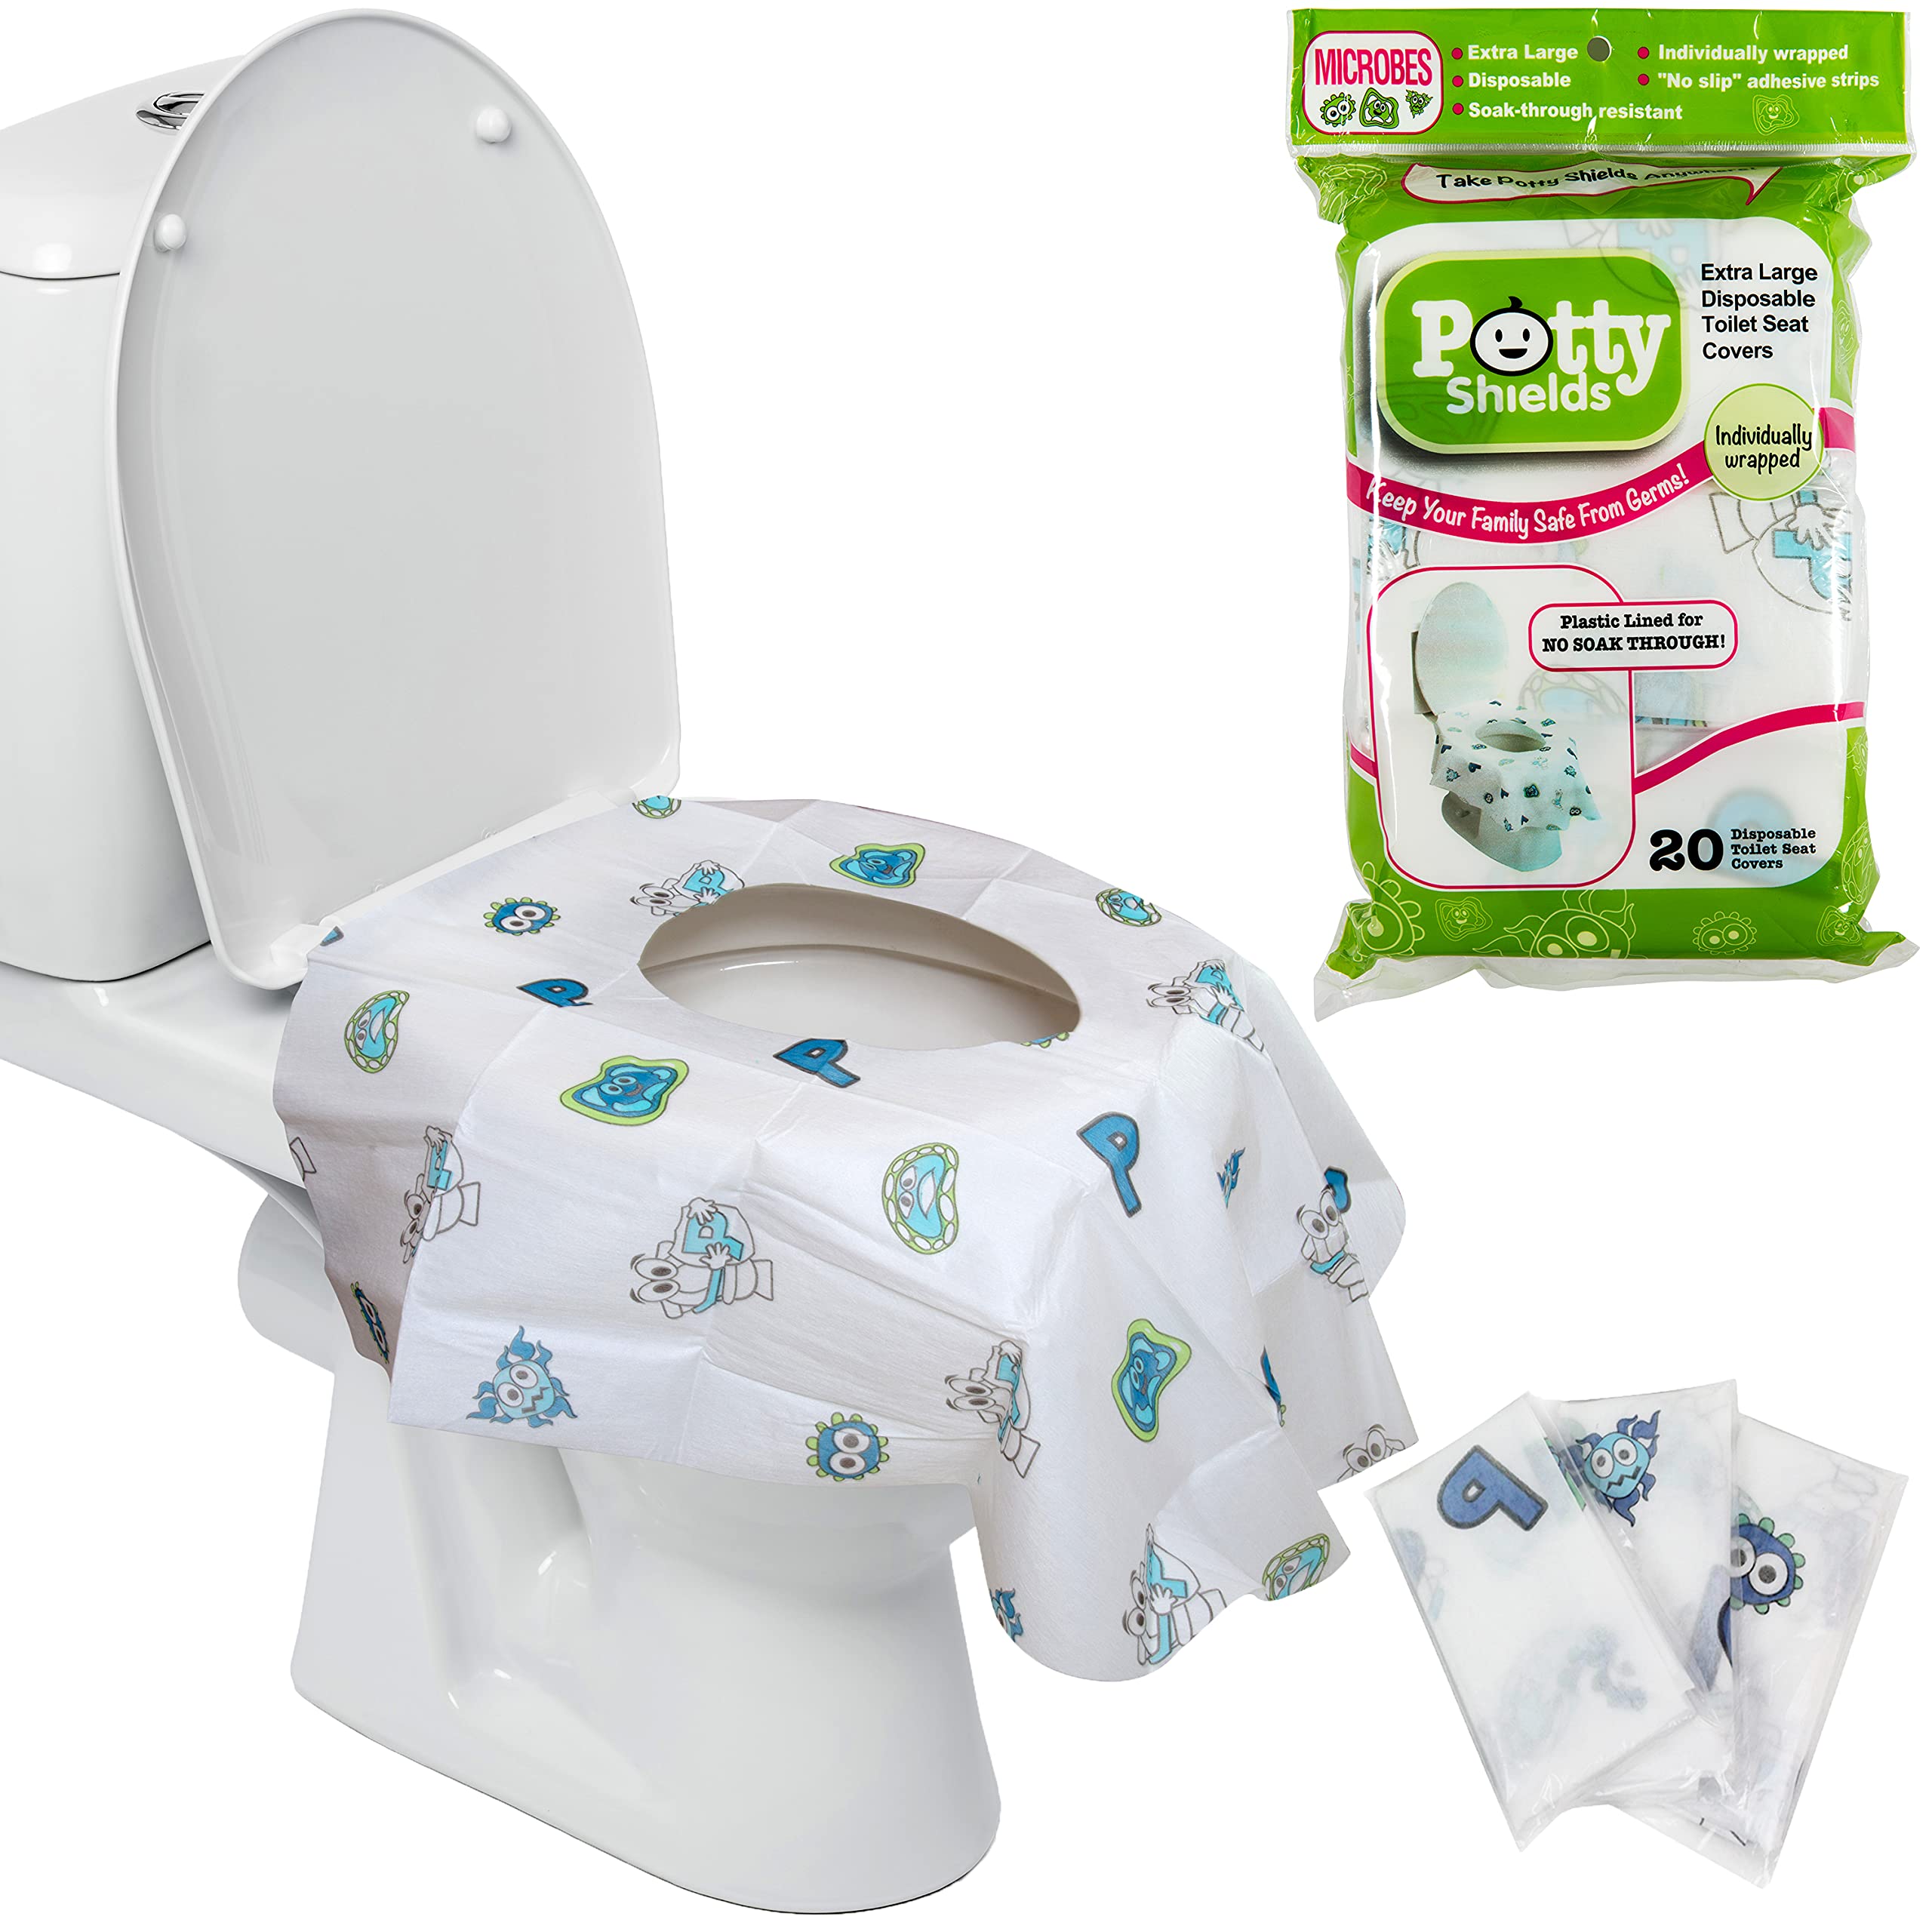 Book Cover Disposable Toilet Seat Covers for Kids & Adults (20 Pack) - Germ Protect from Public Toilets - Waterproof, Individually-Wrapped, Plastic Lined for No Soak Thru, XL to Cover The Whole Toilet - Unisex X-Large (20 Count)